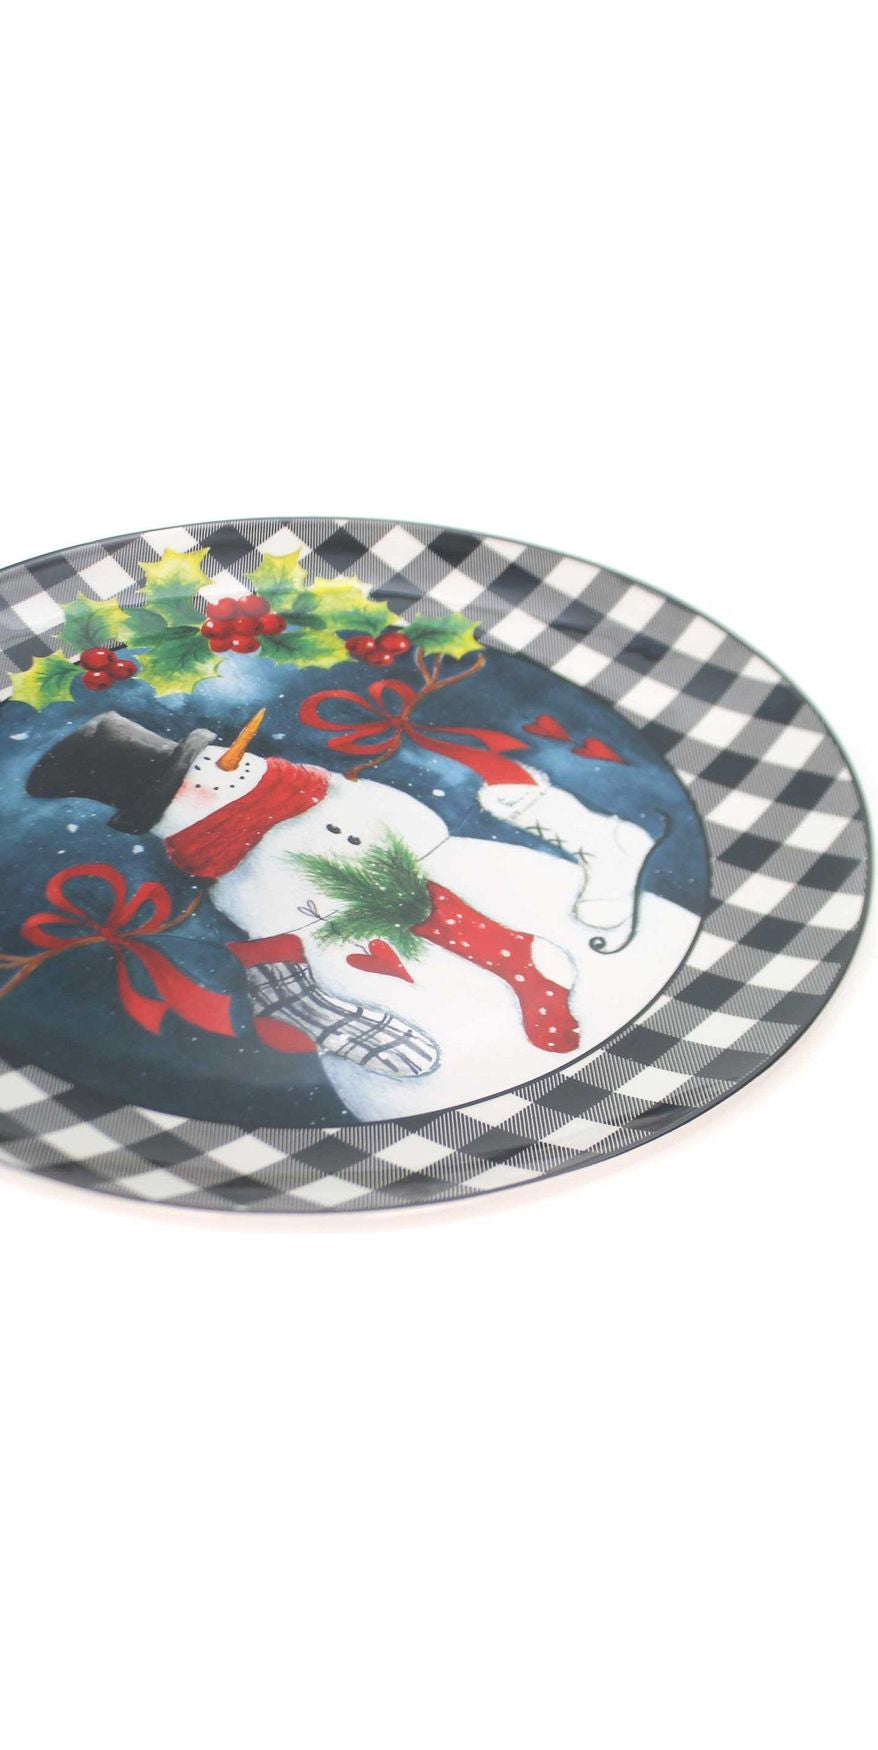 Snowman with Stockings Platter - Michelle's aDOORable Creations - Glass Fusion